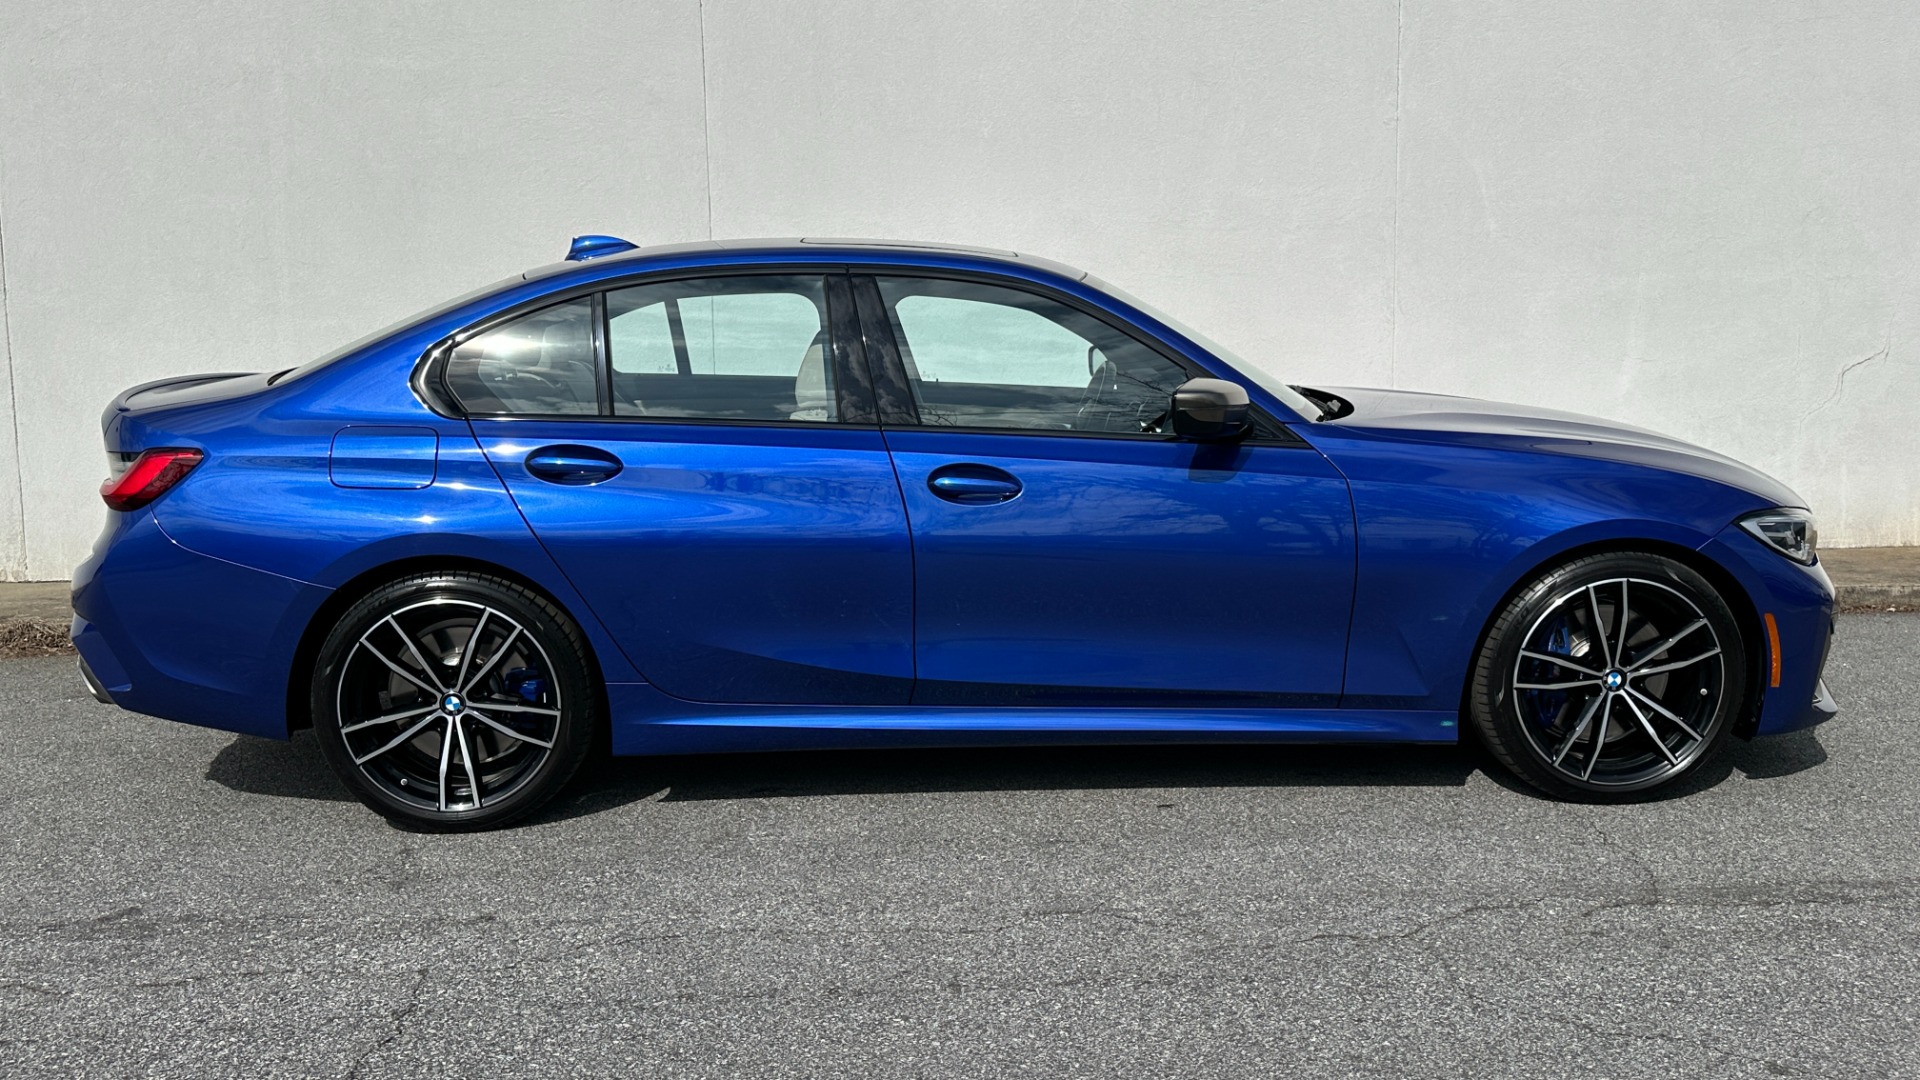 Used 2020 BMW 3 Series M340i / M SPORT BRAKES / M PERF EXHAUST / PREMIUM PACKAGE for sale $46,495 at Formula Imports in Charlotte NC 28227 6